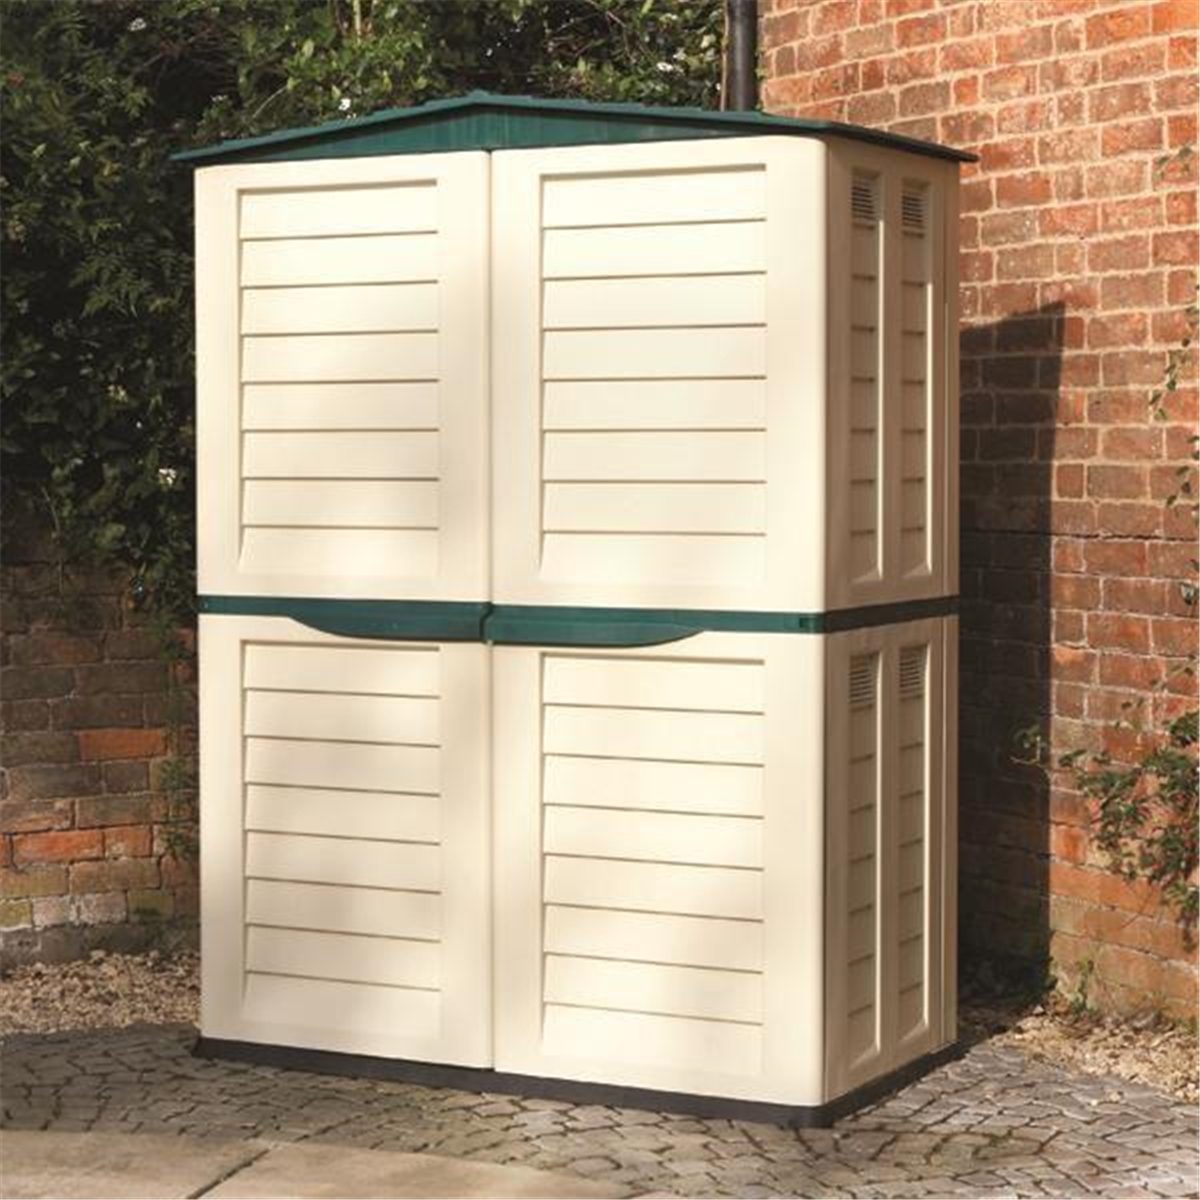 5 x 3 Deluxe Plastic Tall Shed (1.51m x 0.83m) HomeBerry